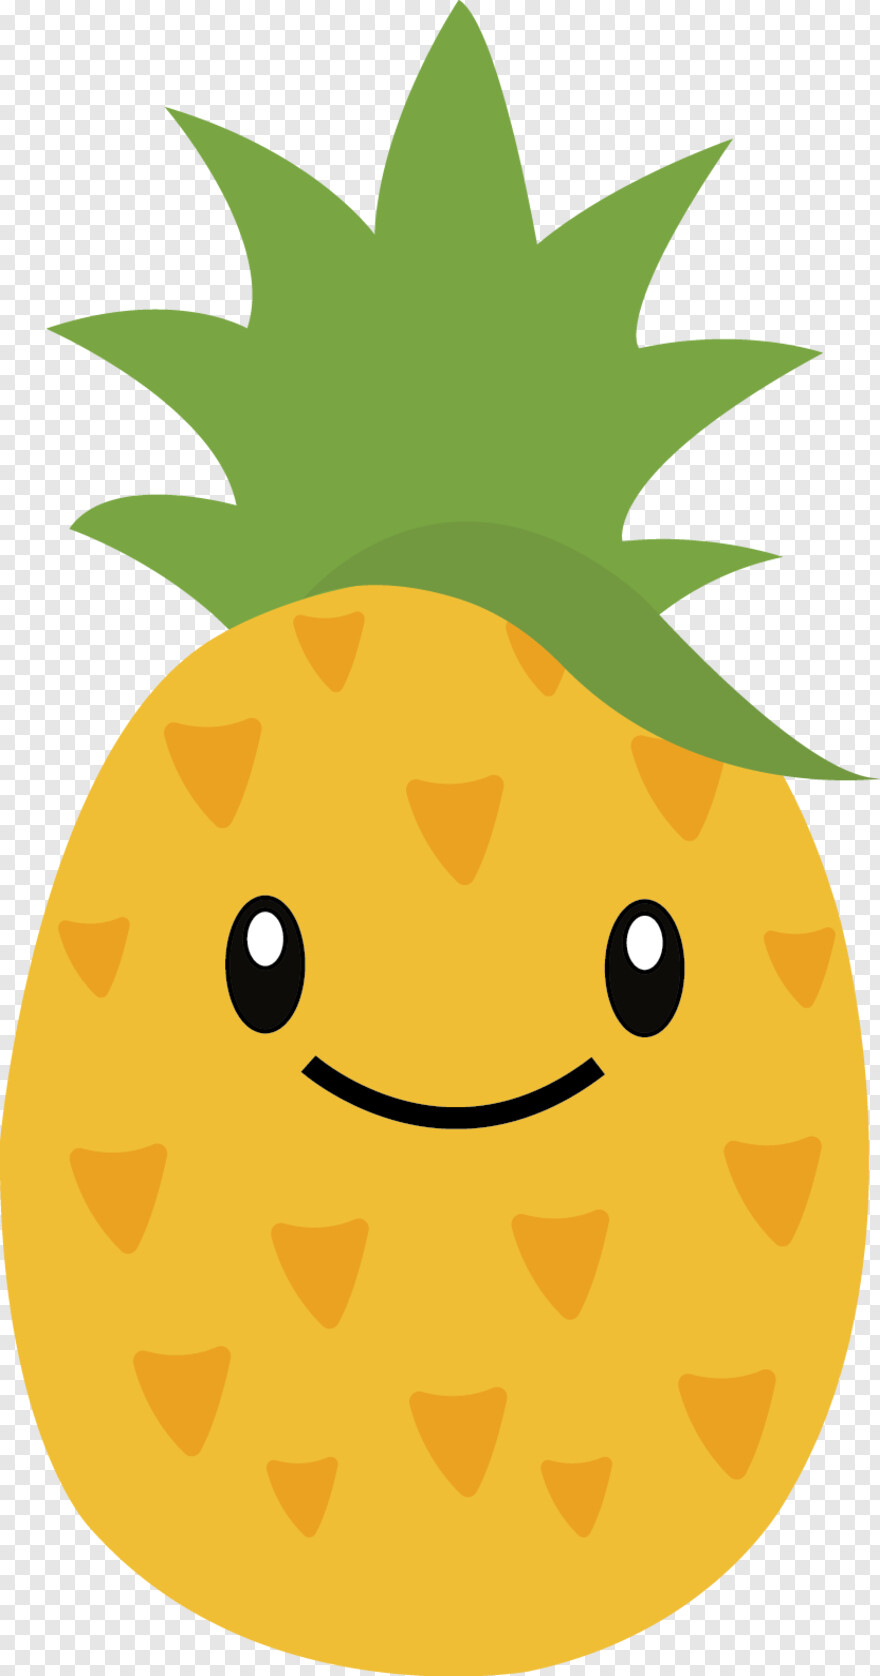 pineapple-clipart # 850255